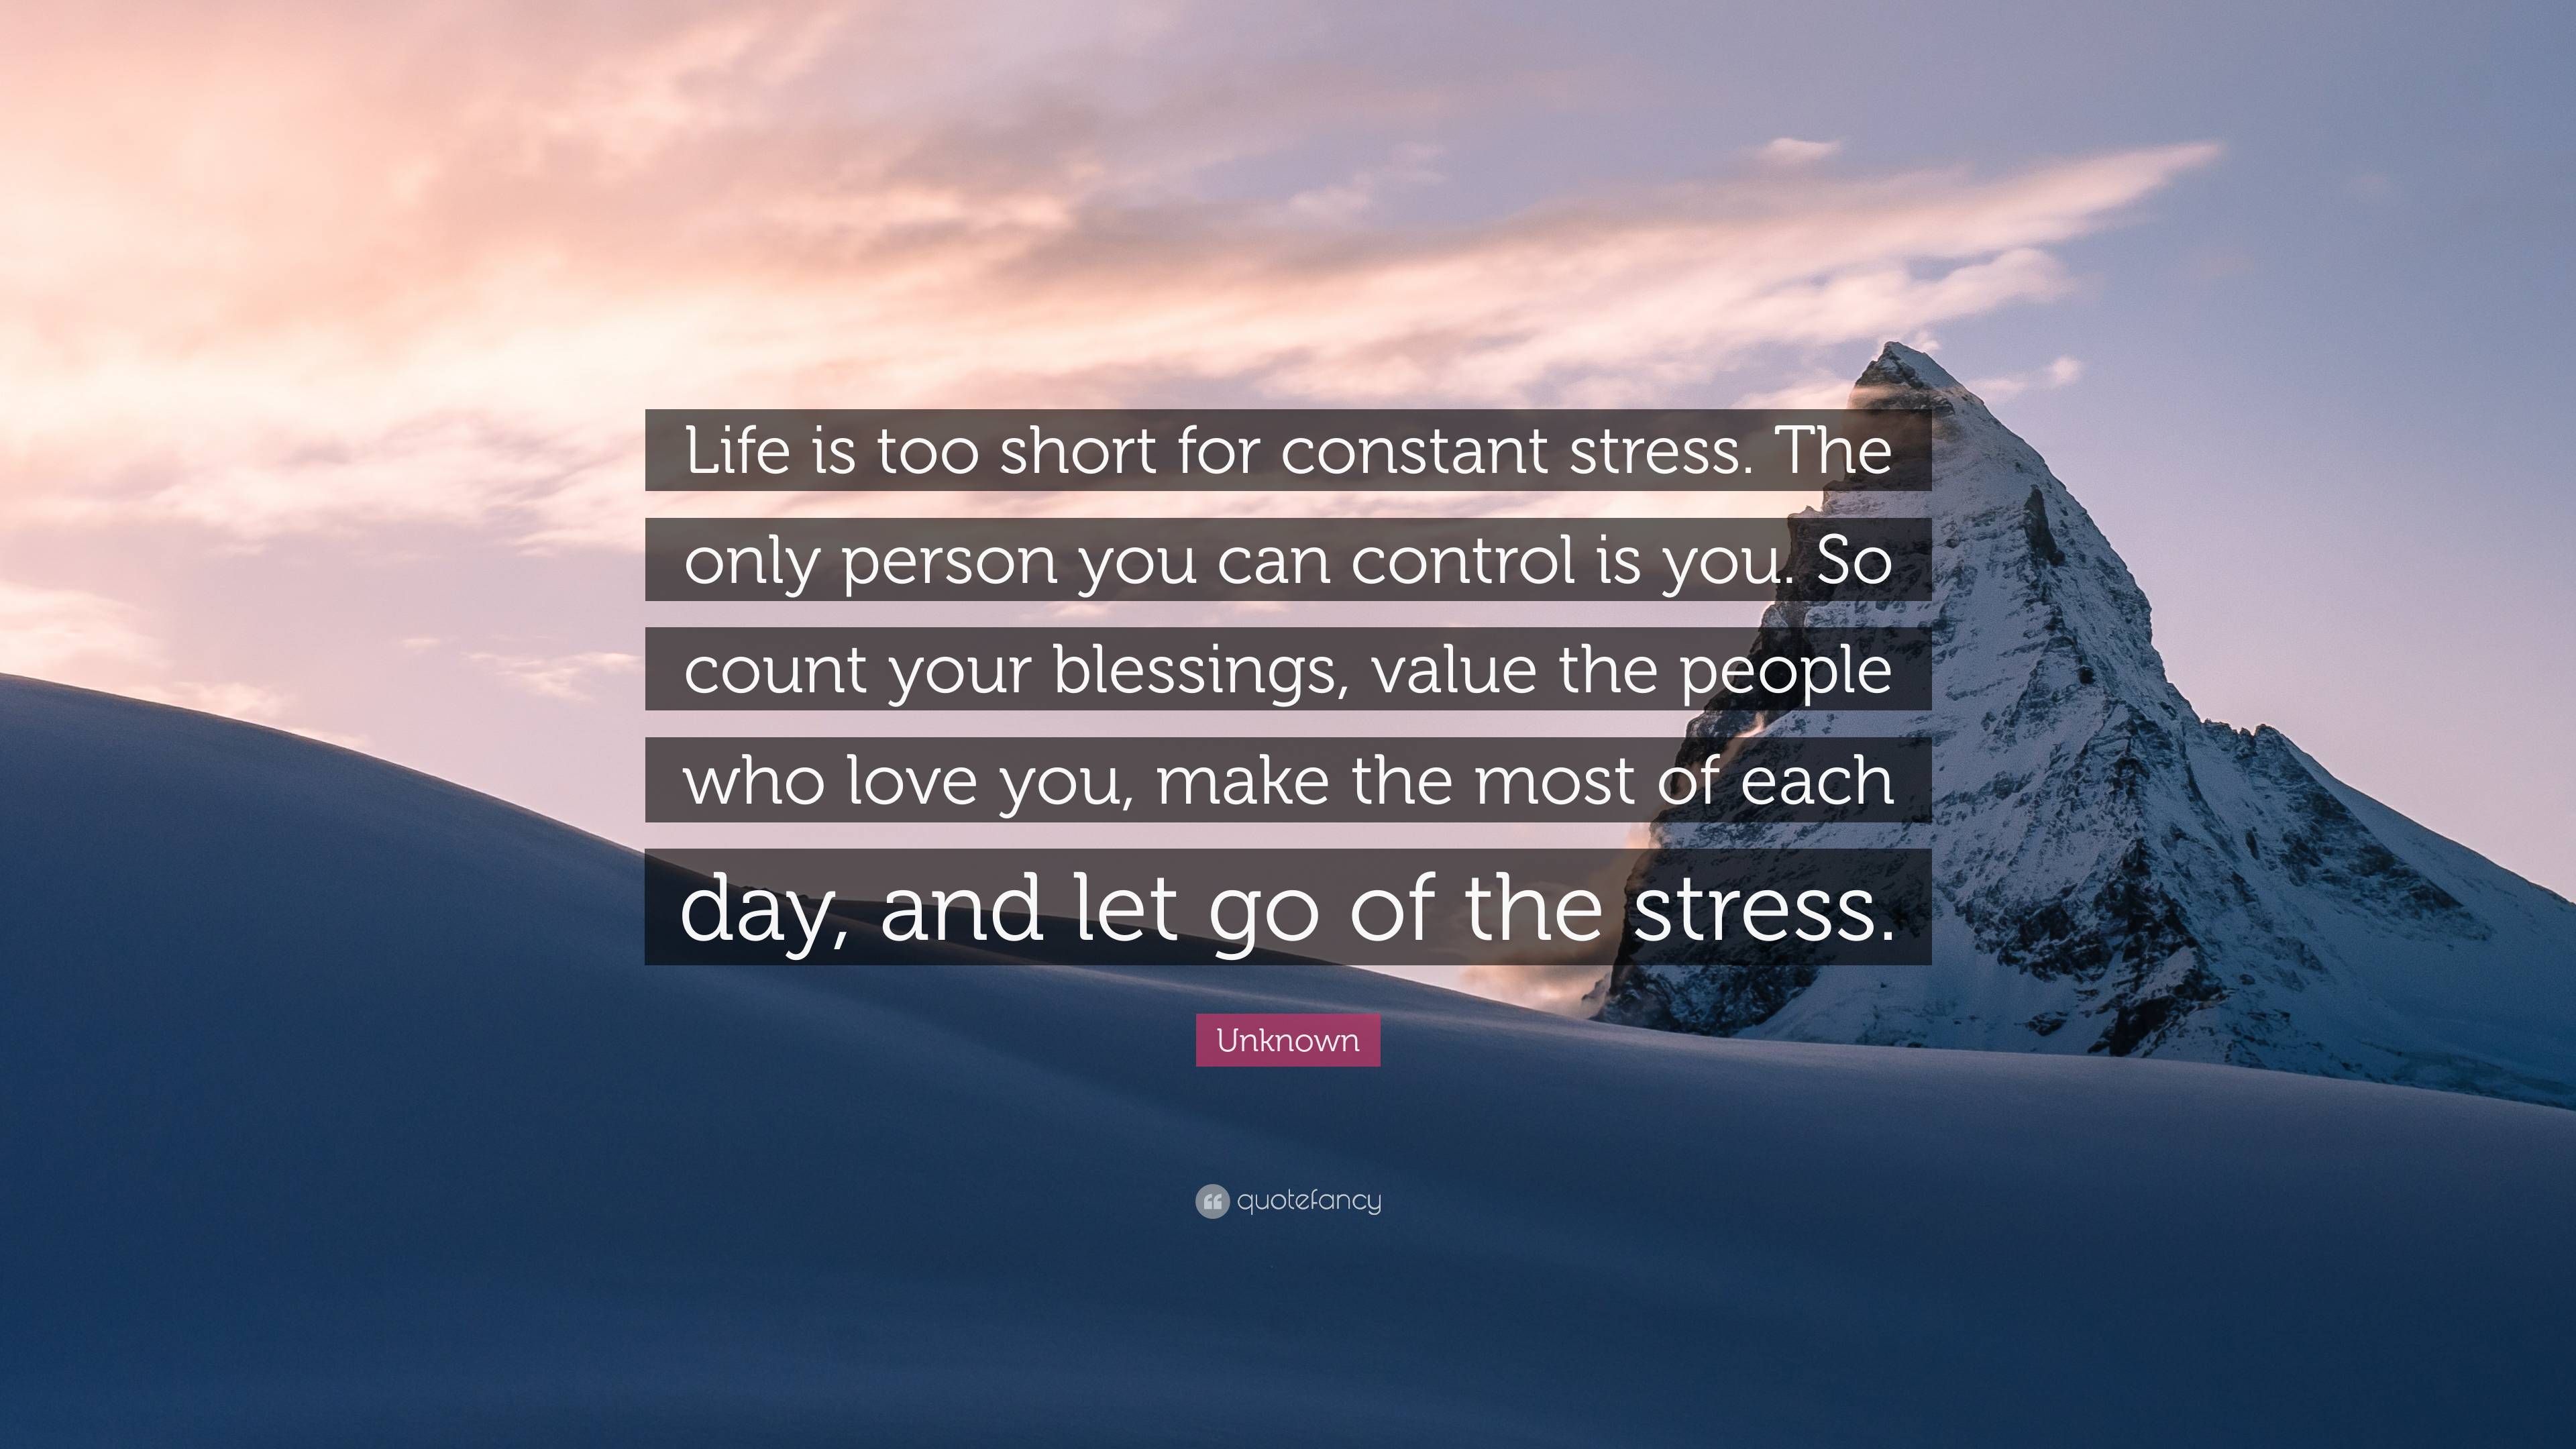 https://quotefancy.com/media/wallpaper/3840x2160/7685076-Unknown-Quote-Life-is-too-short-for-constant-stress-The-only.jpg